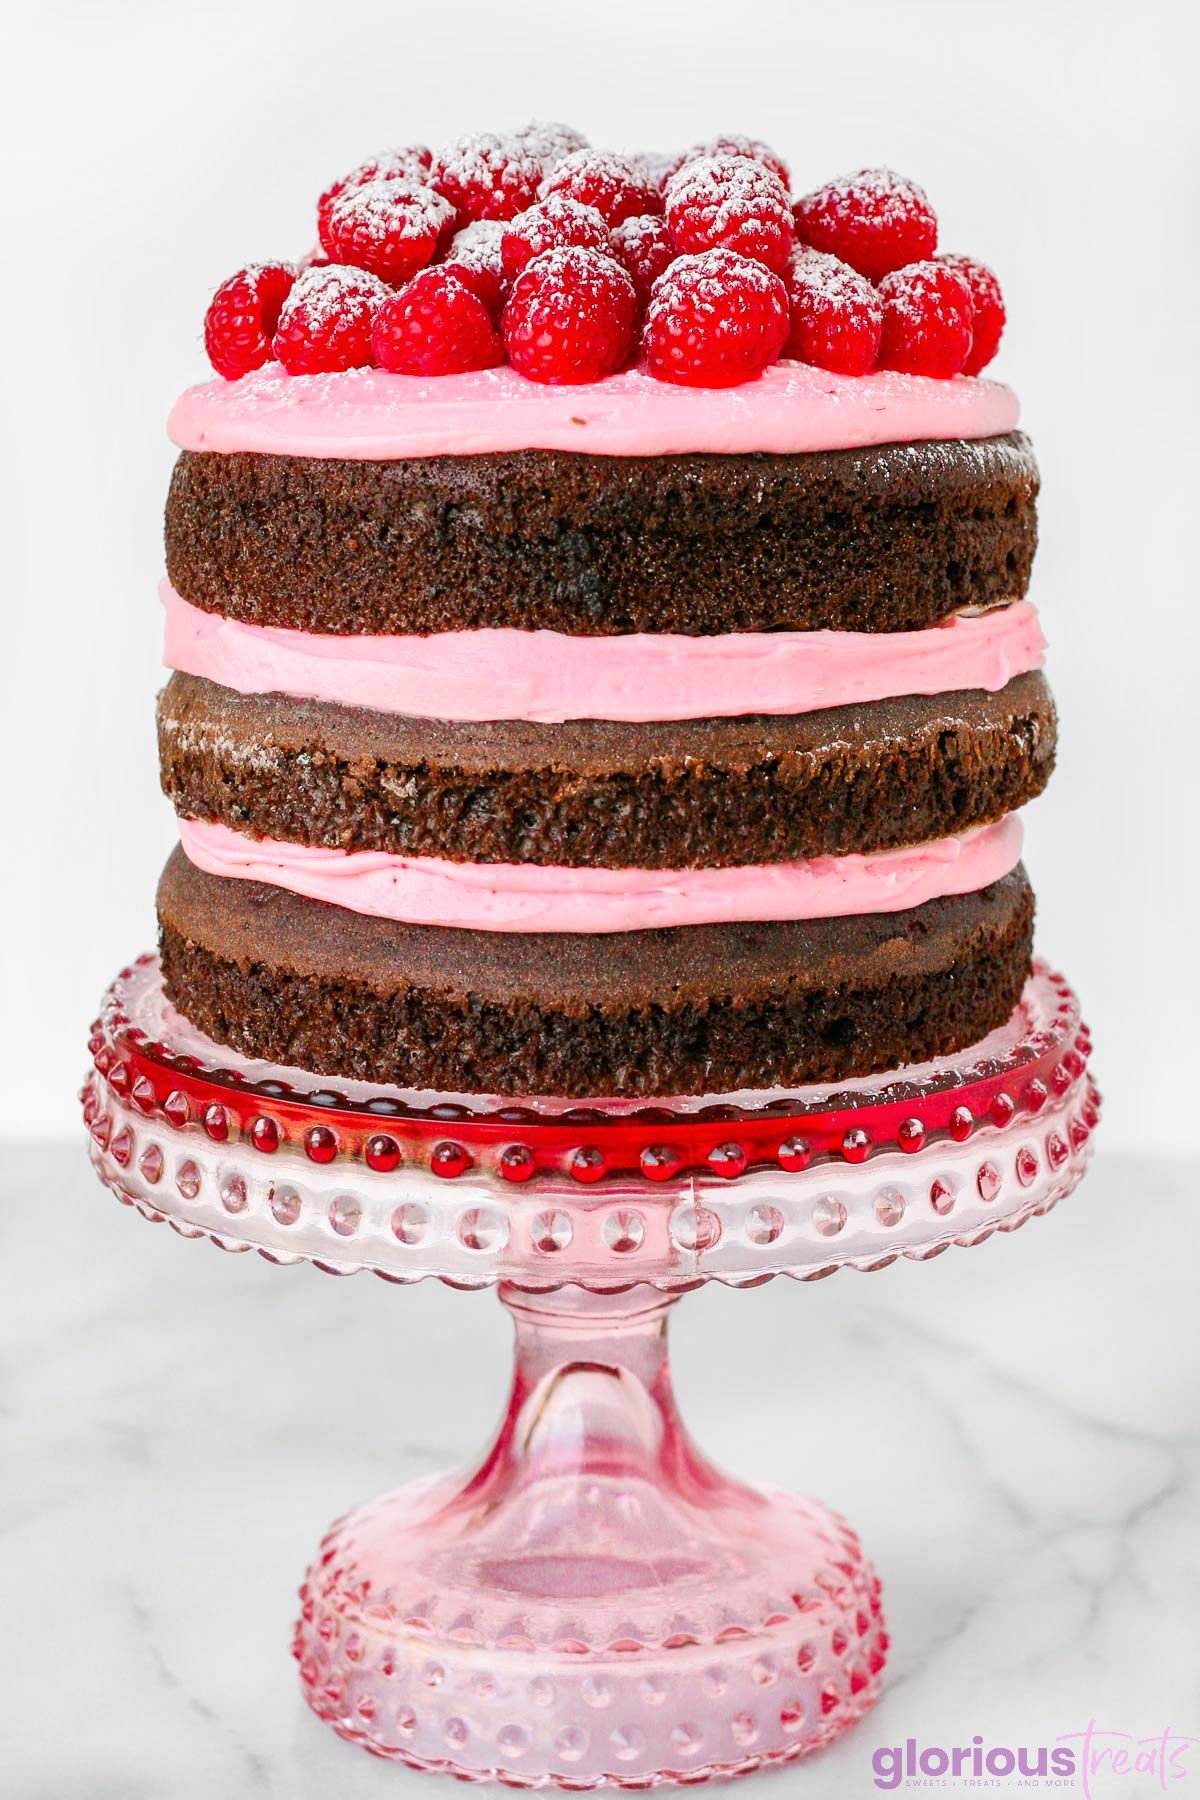 three layer raspberry chocolate cake with raspberry buttercream between each cake layer. cake is on pink cake stand and topped with fresh raspberries and powdered sugar.